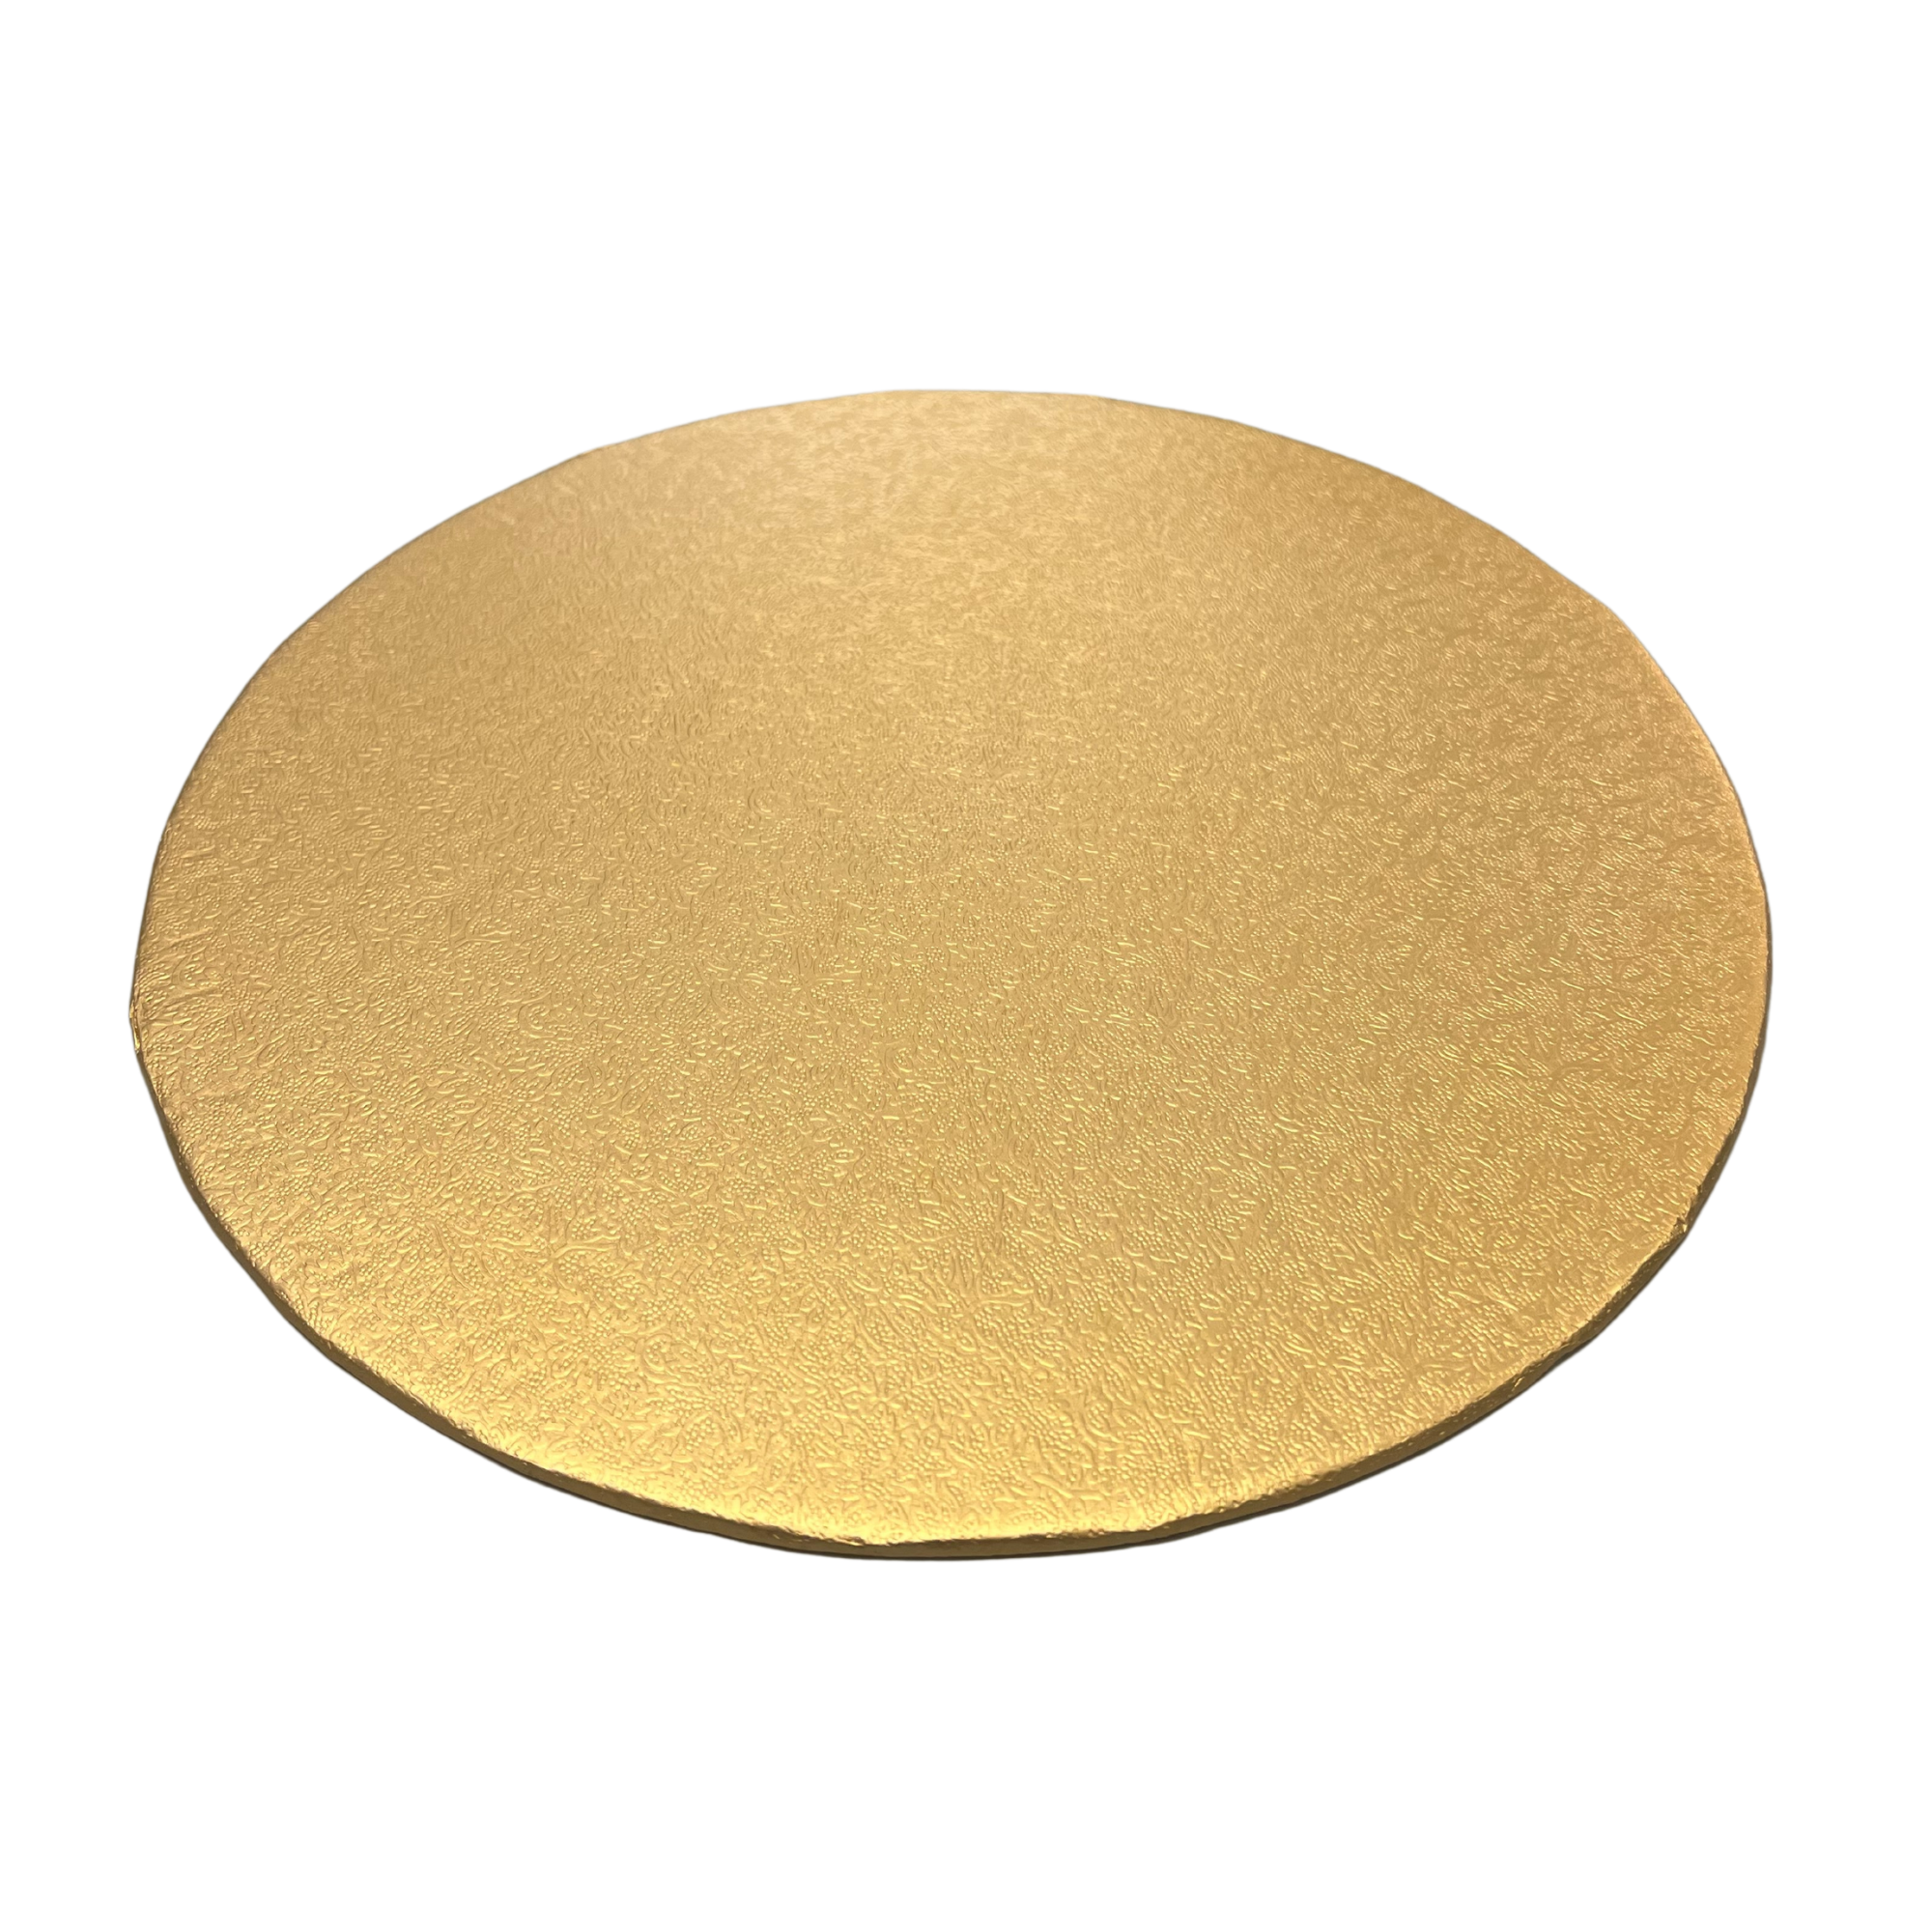 Double Thick Round Turn Edge Cake Card / Board Pale Gold Fern (3mm Thick) - 10"